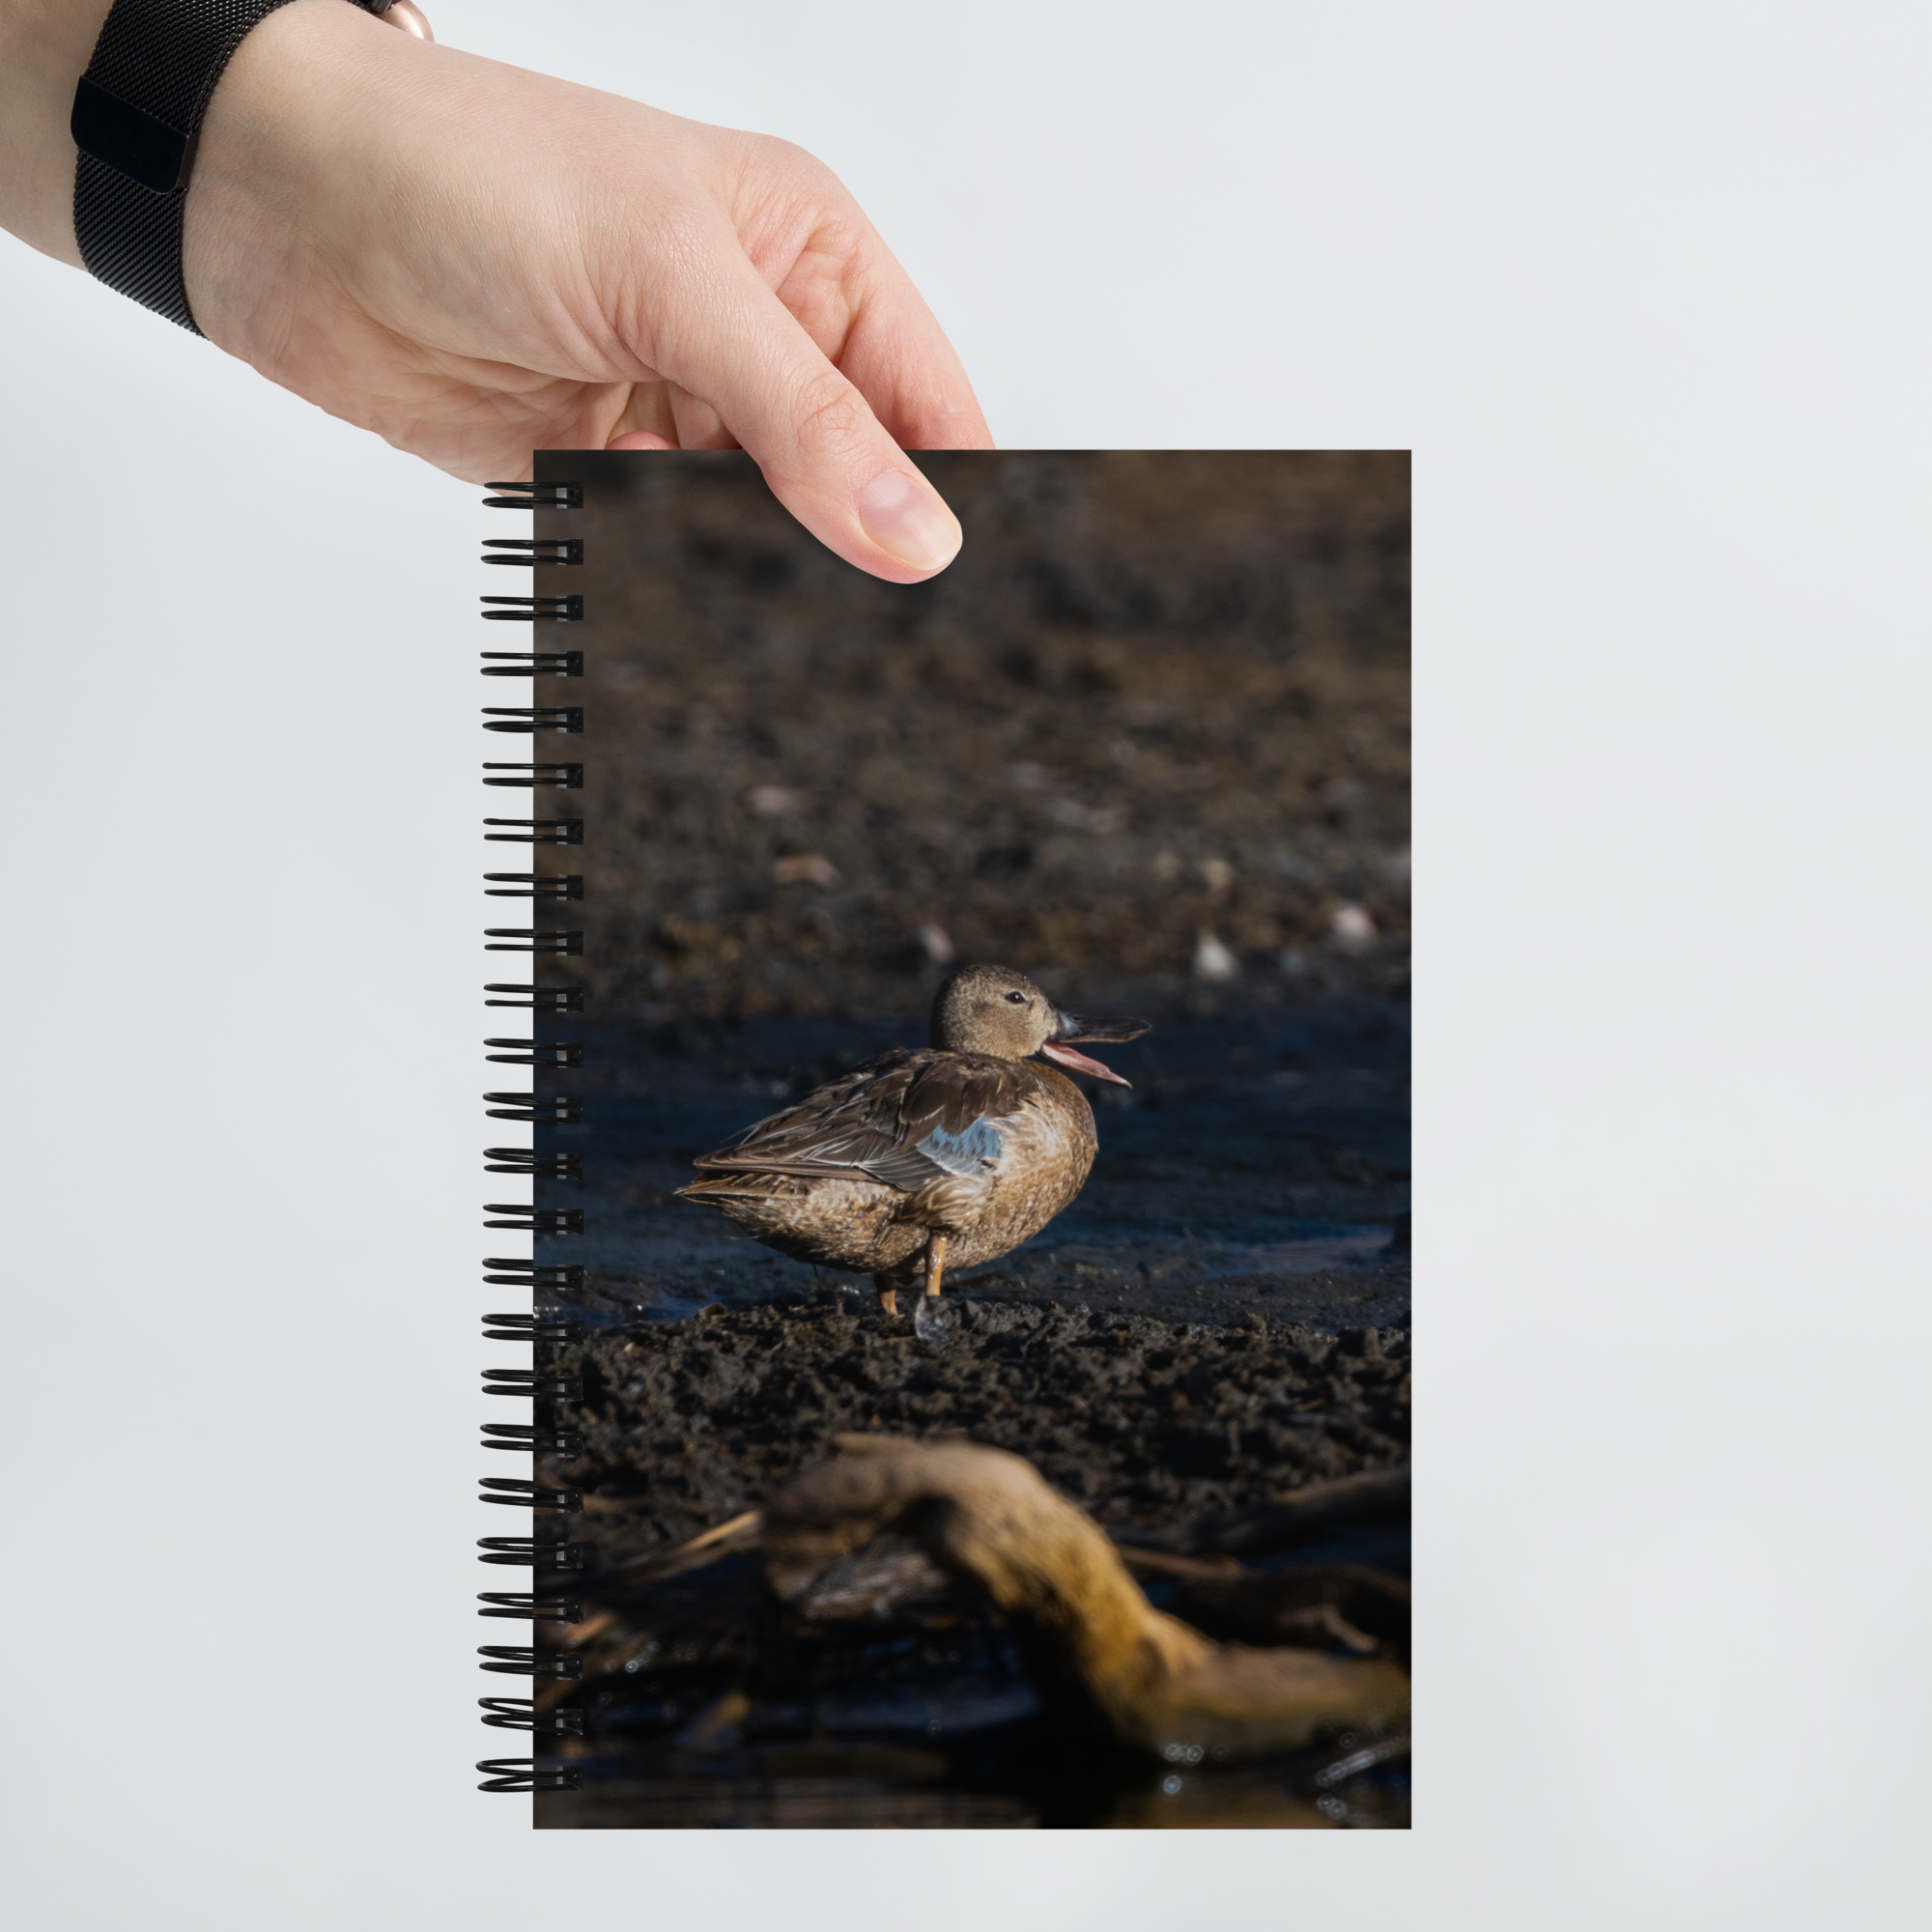 Cinnamon Teal Spiral Spiral Notebook - The Overland Diaries